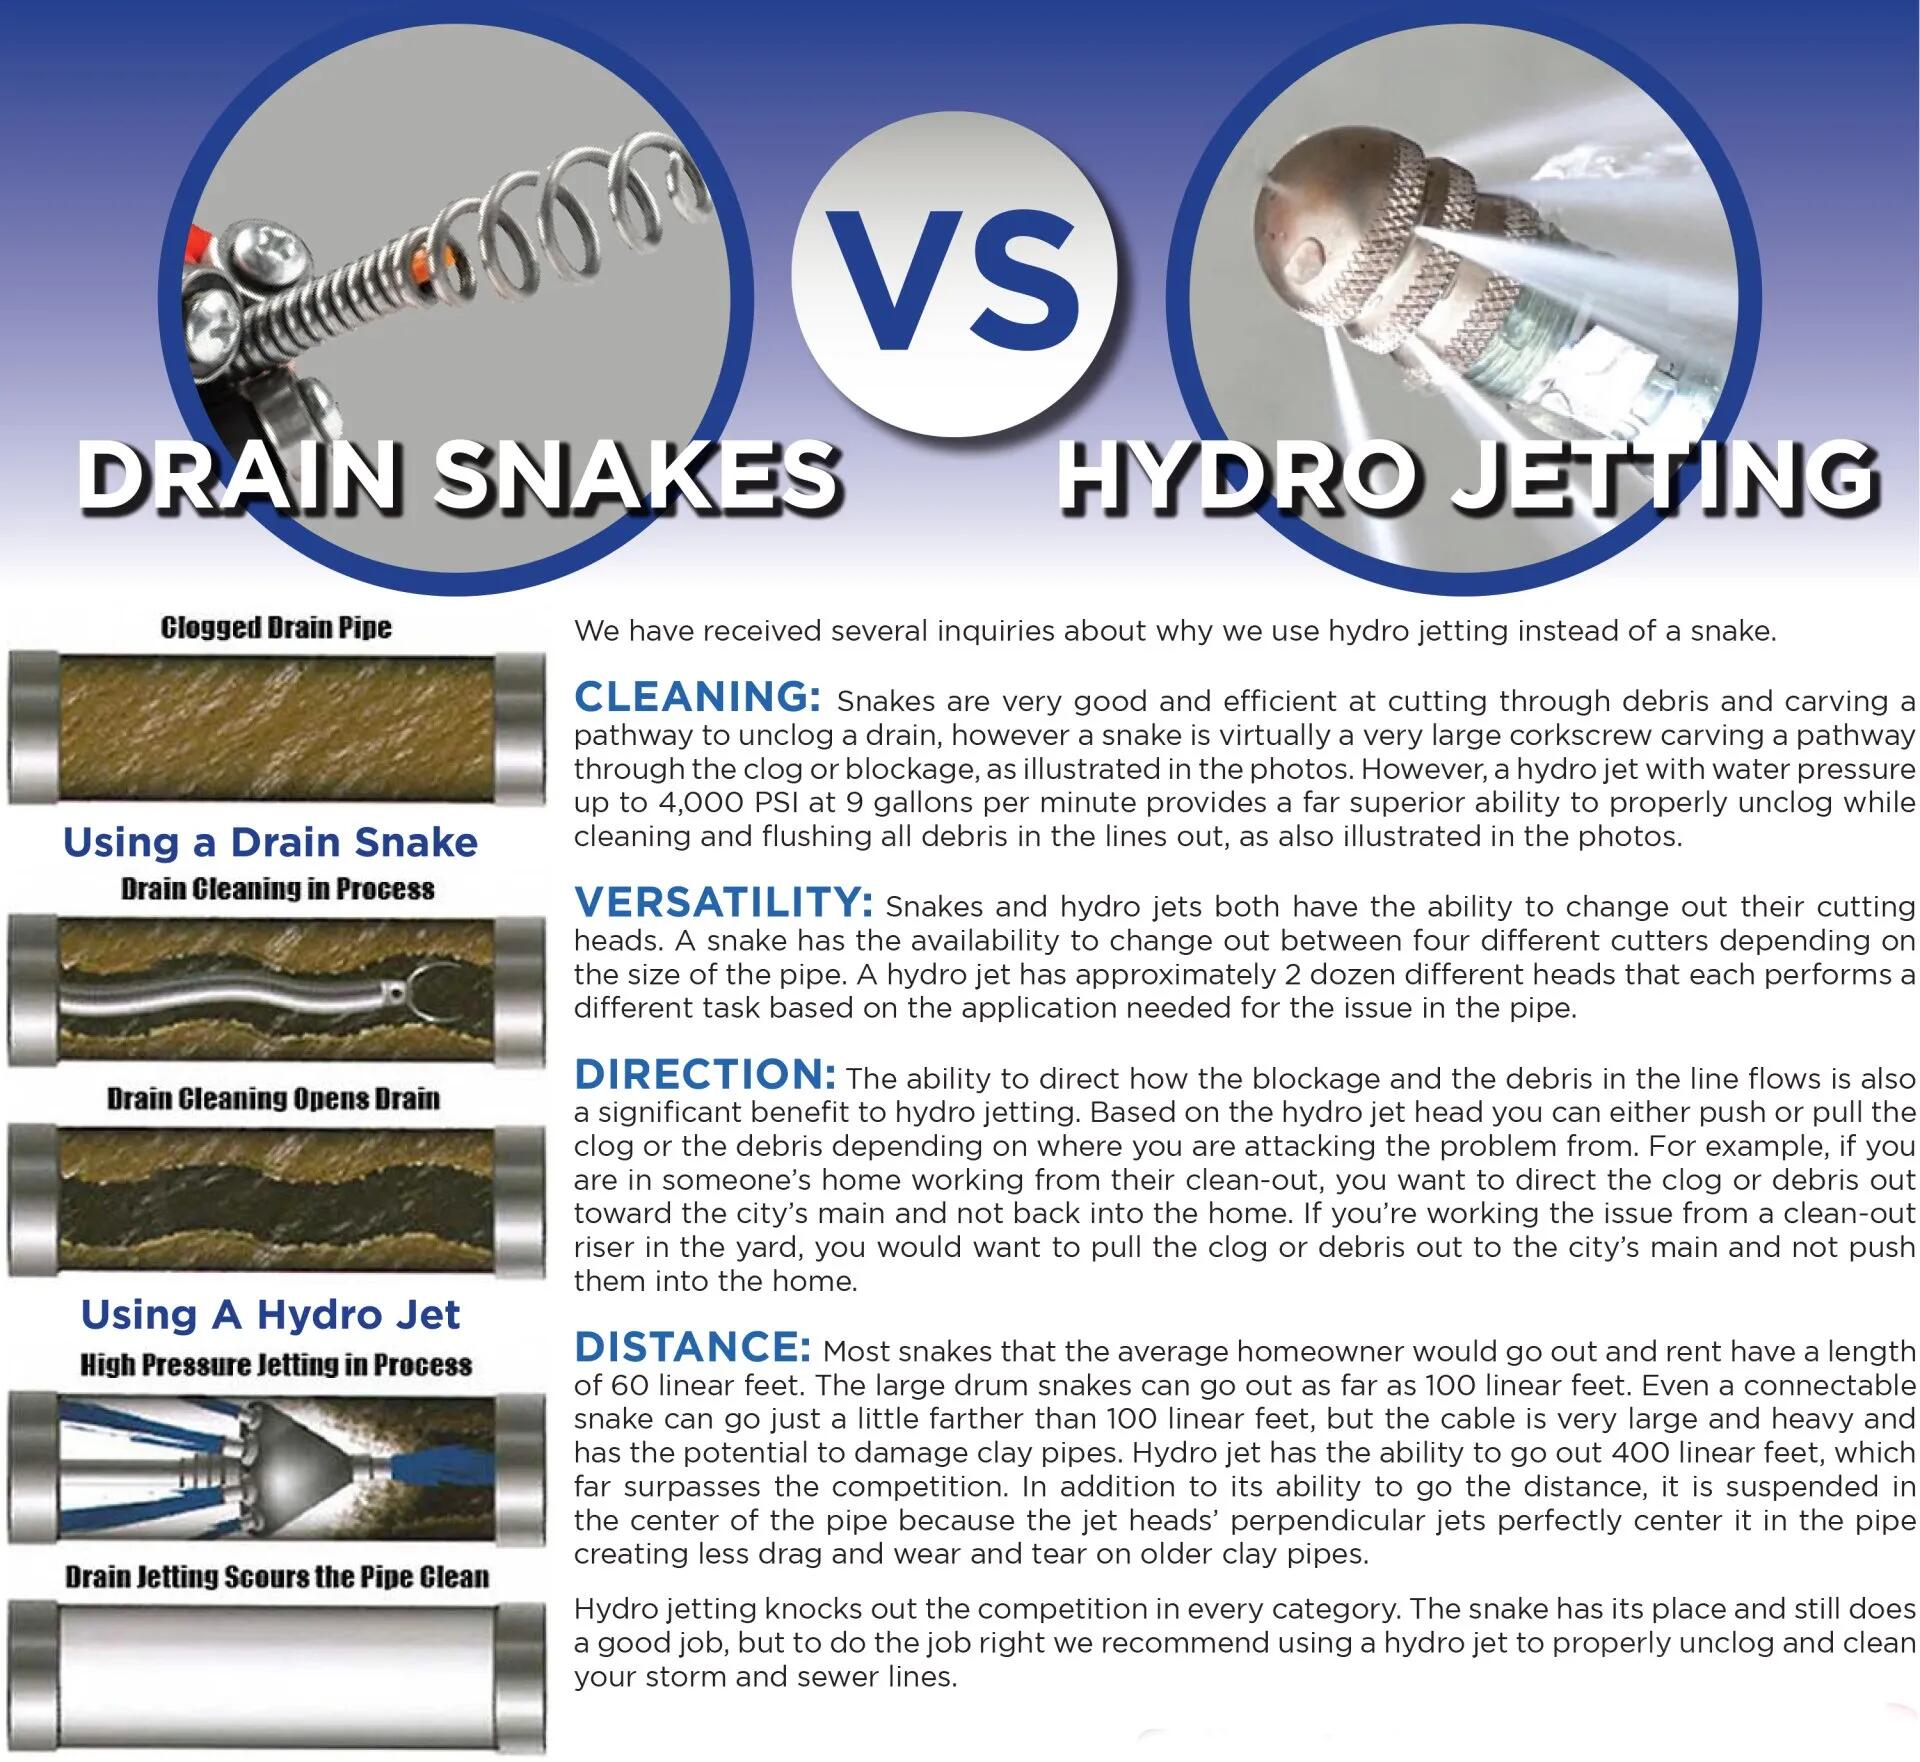 Drain Snakes vs Hydro Jetting infographic